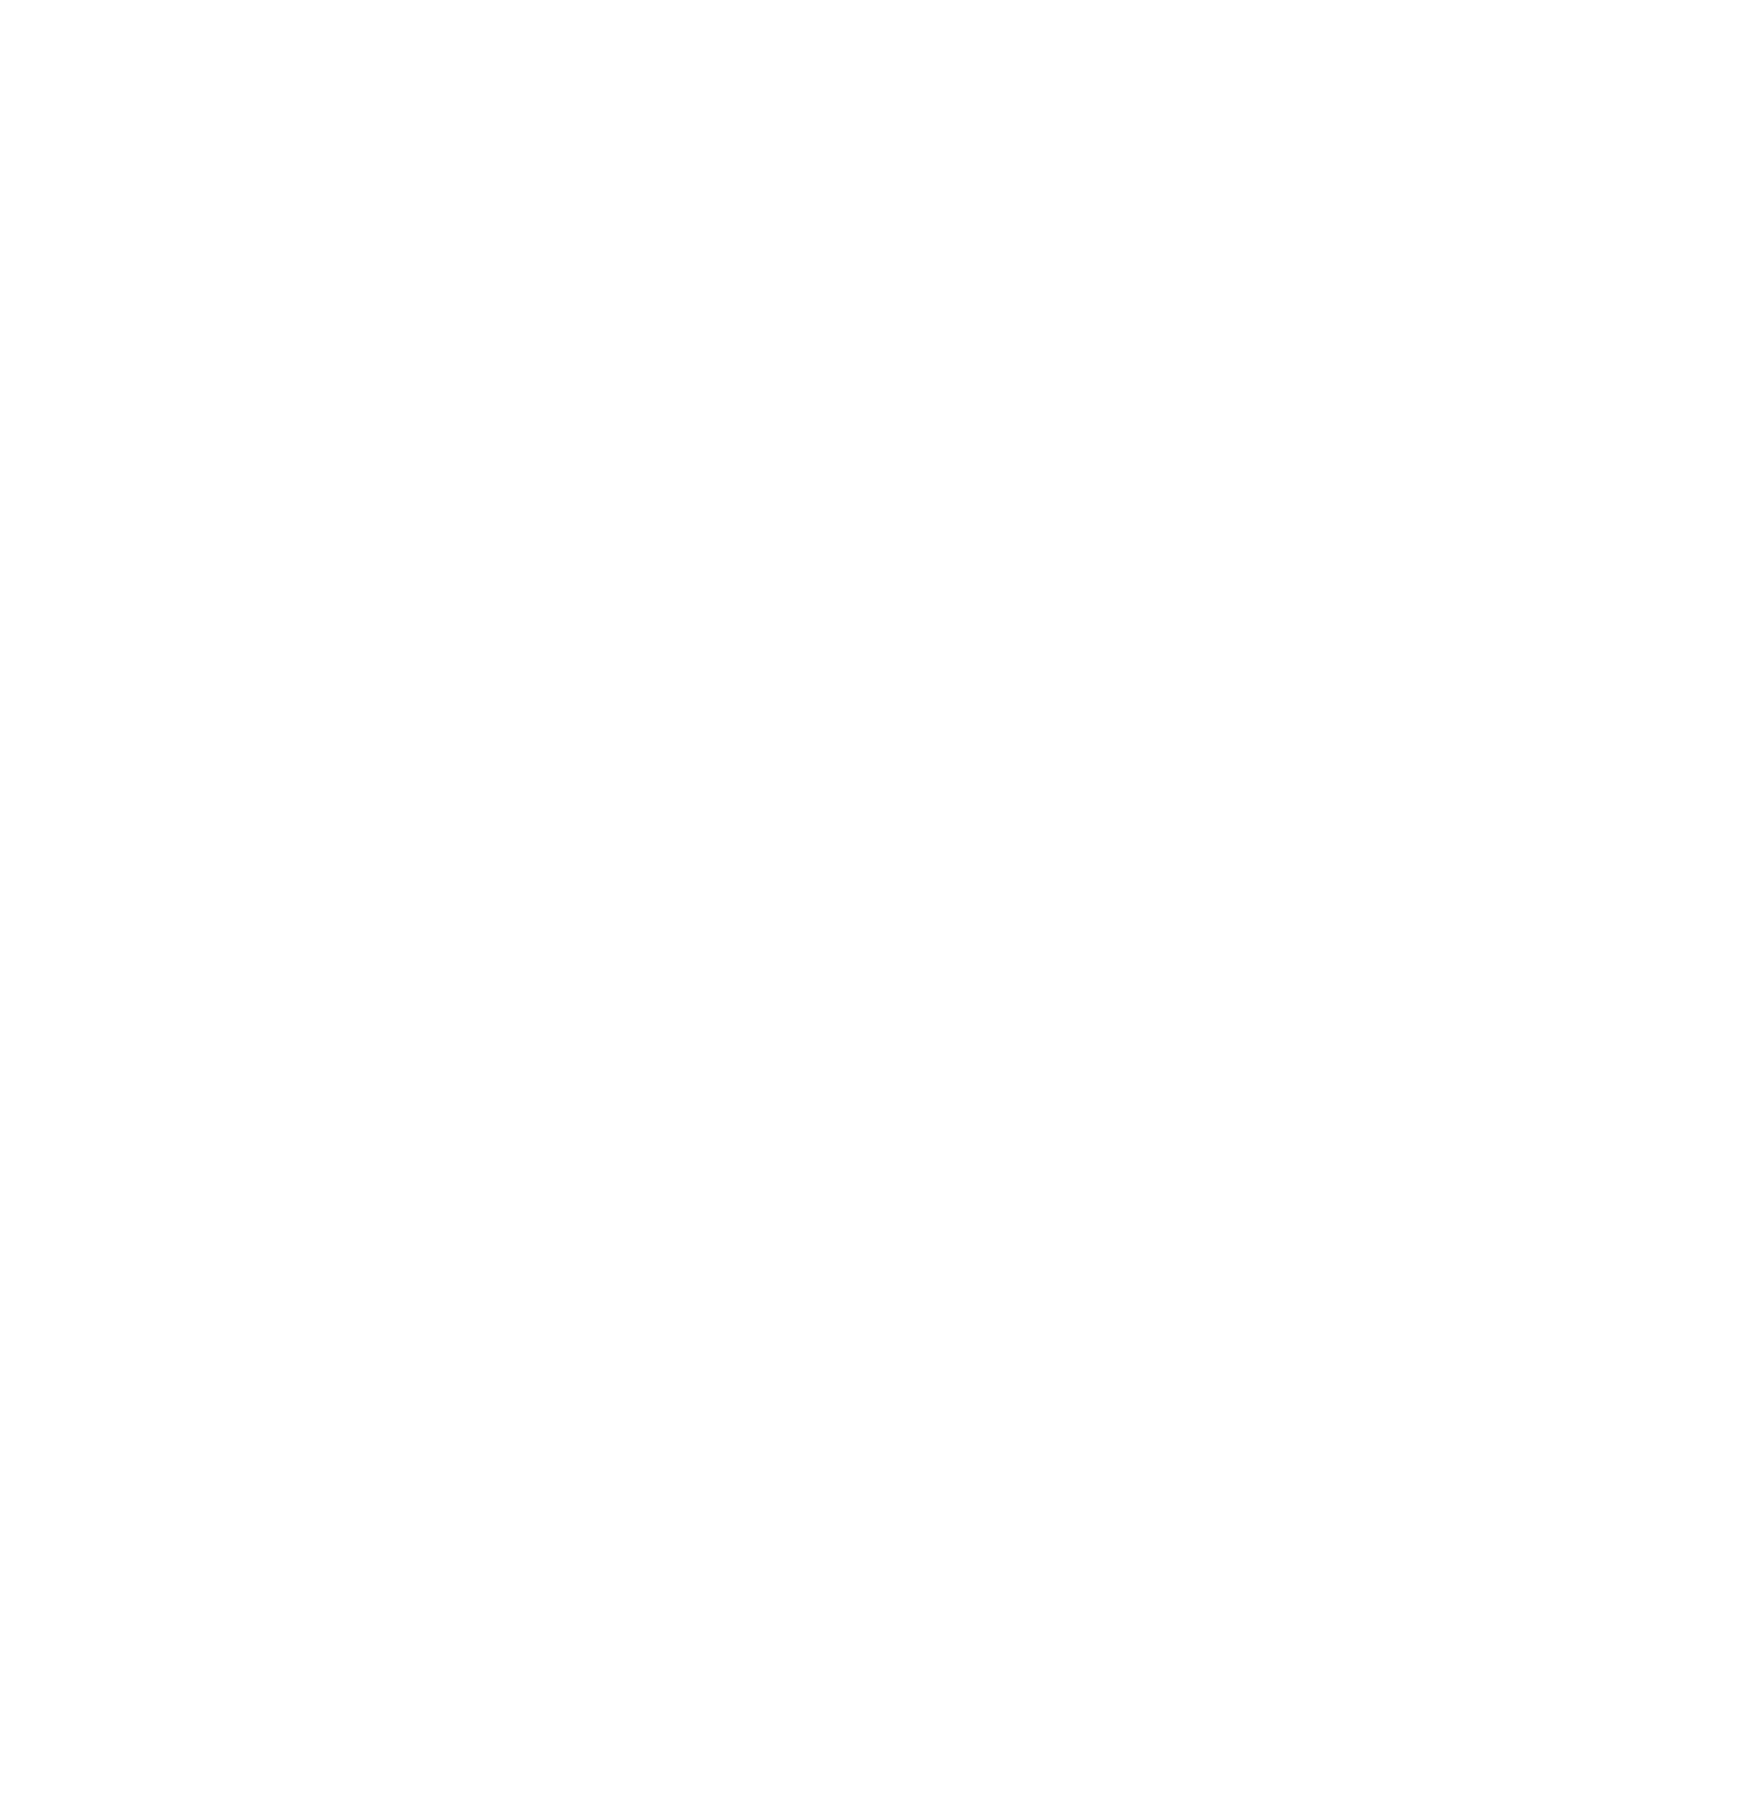 Dumbbells clipart healthy. Brentwood group classes home